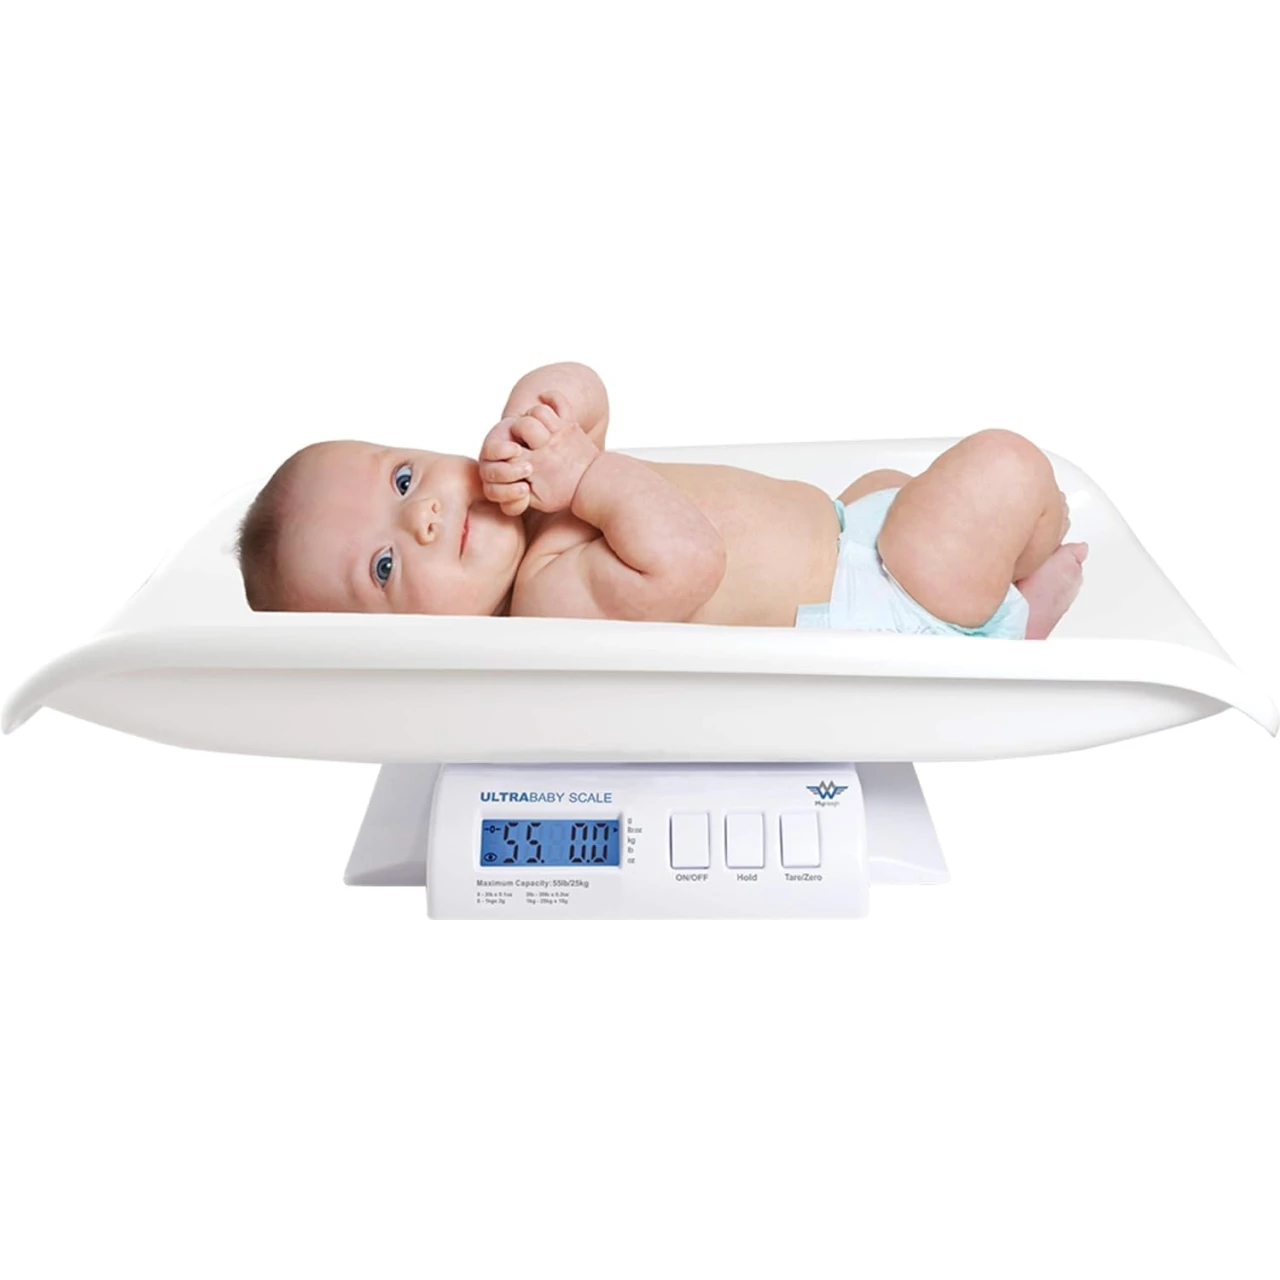 My Weigh Ultra Baby Precision Digital Baby or Pet Scale